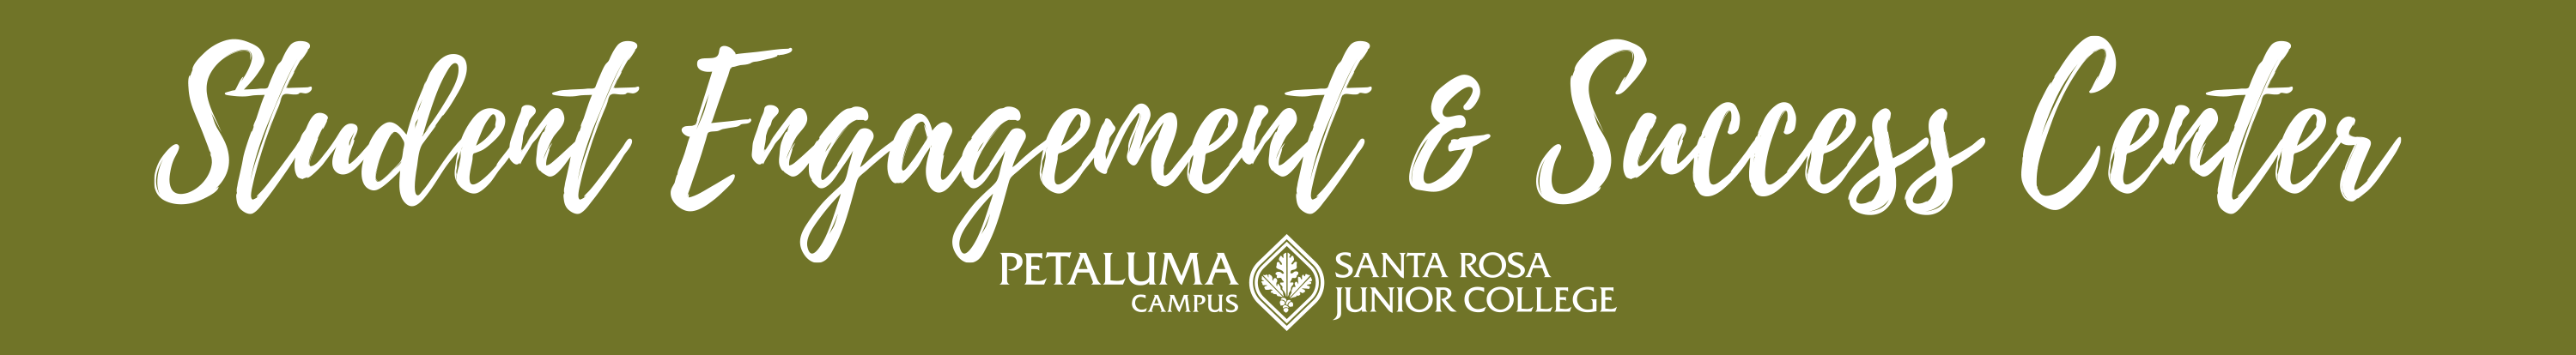 student engagement and success center banner